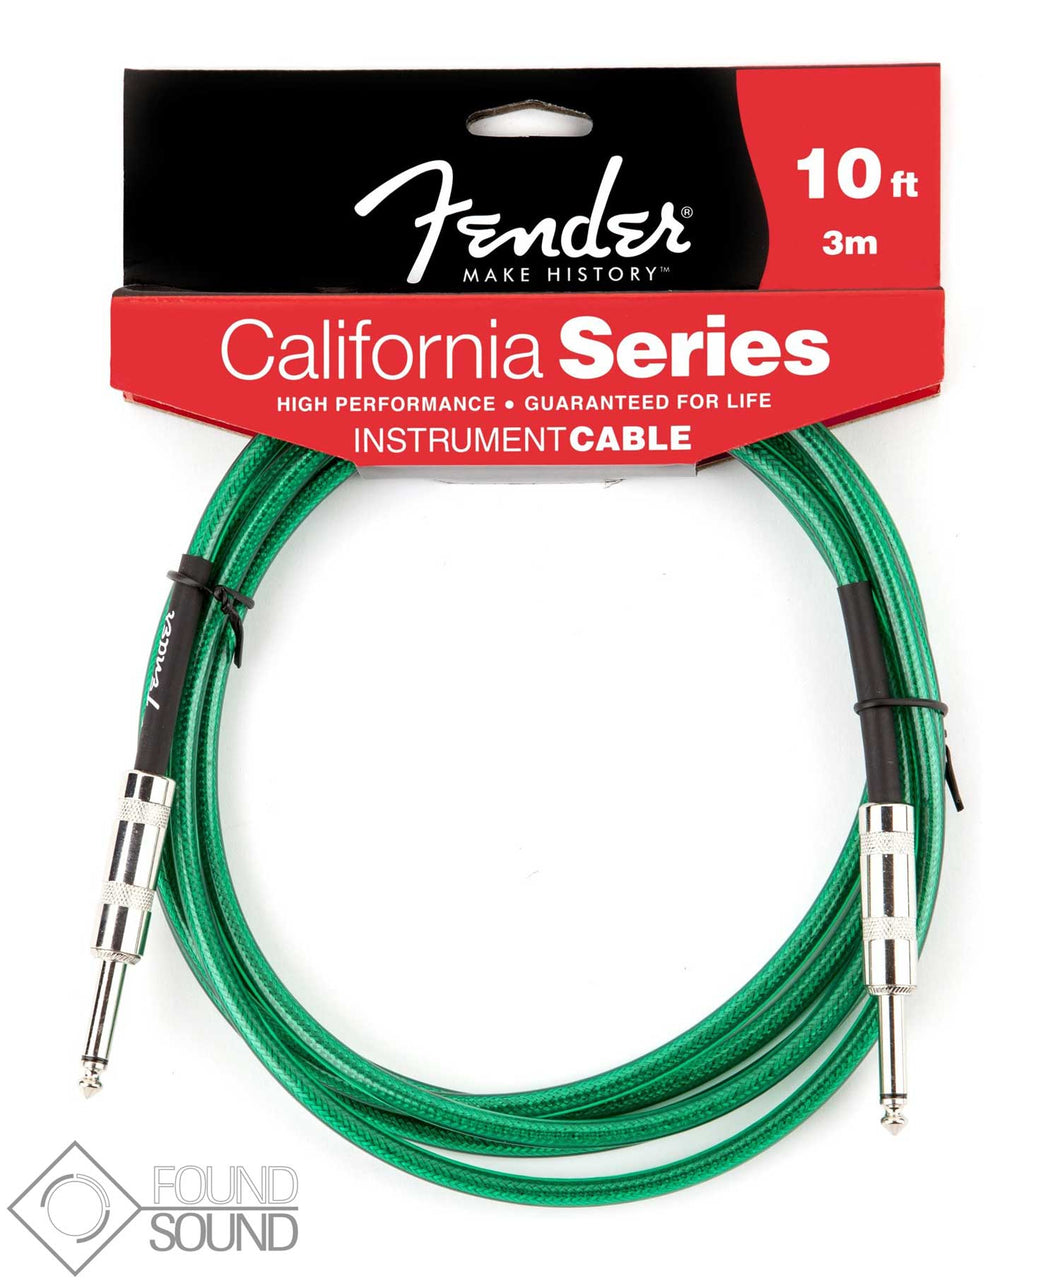 Fender California Series 10 Foot Instrument Cable (Green)